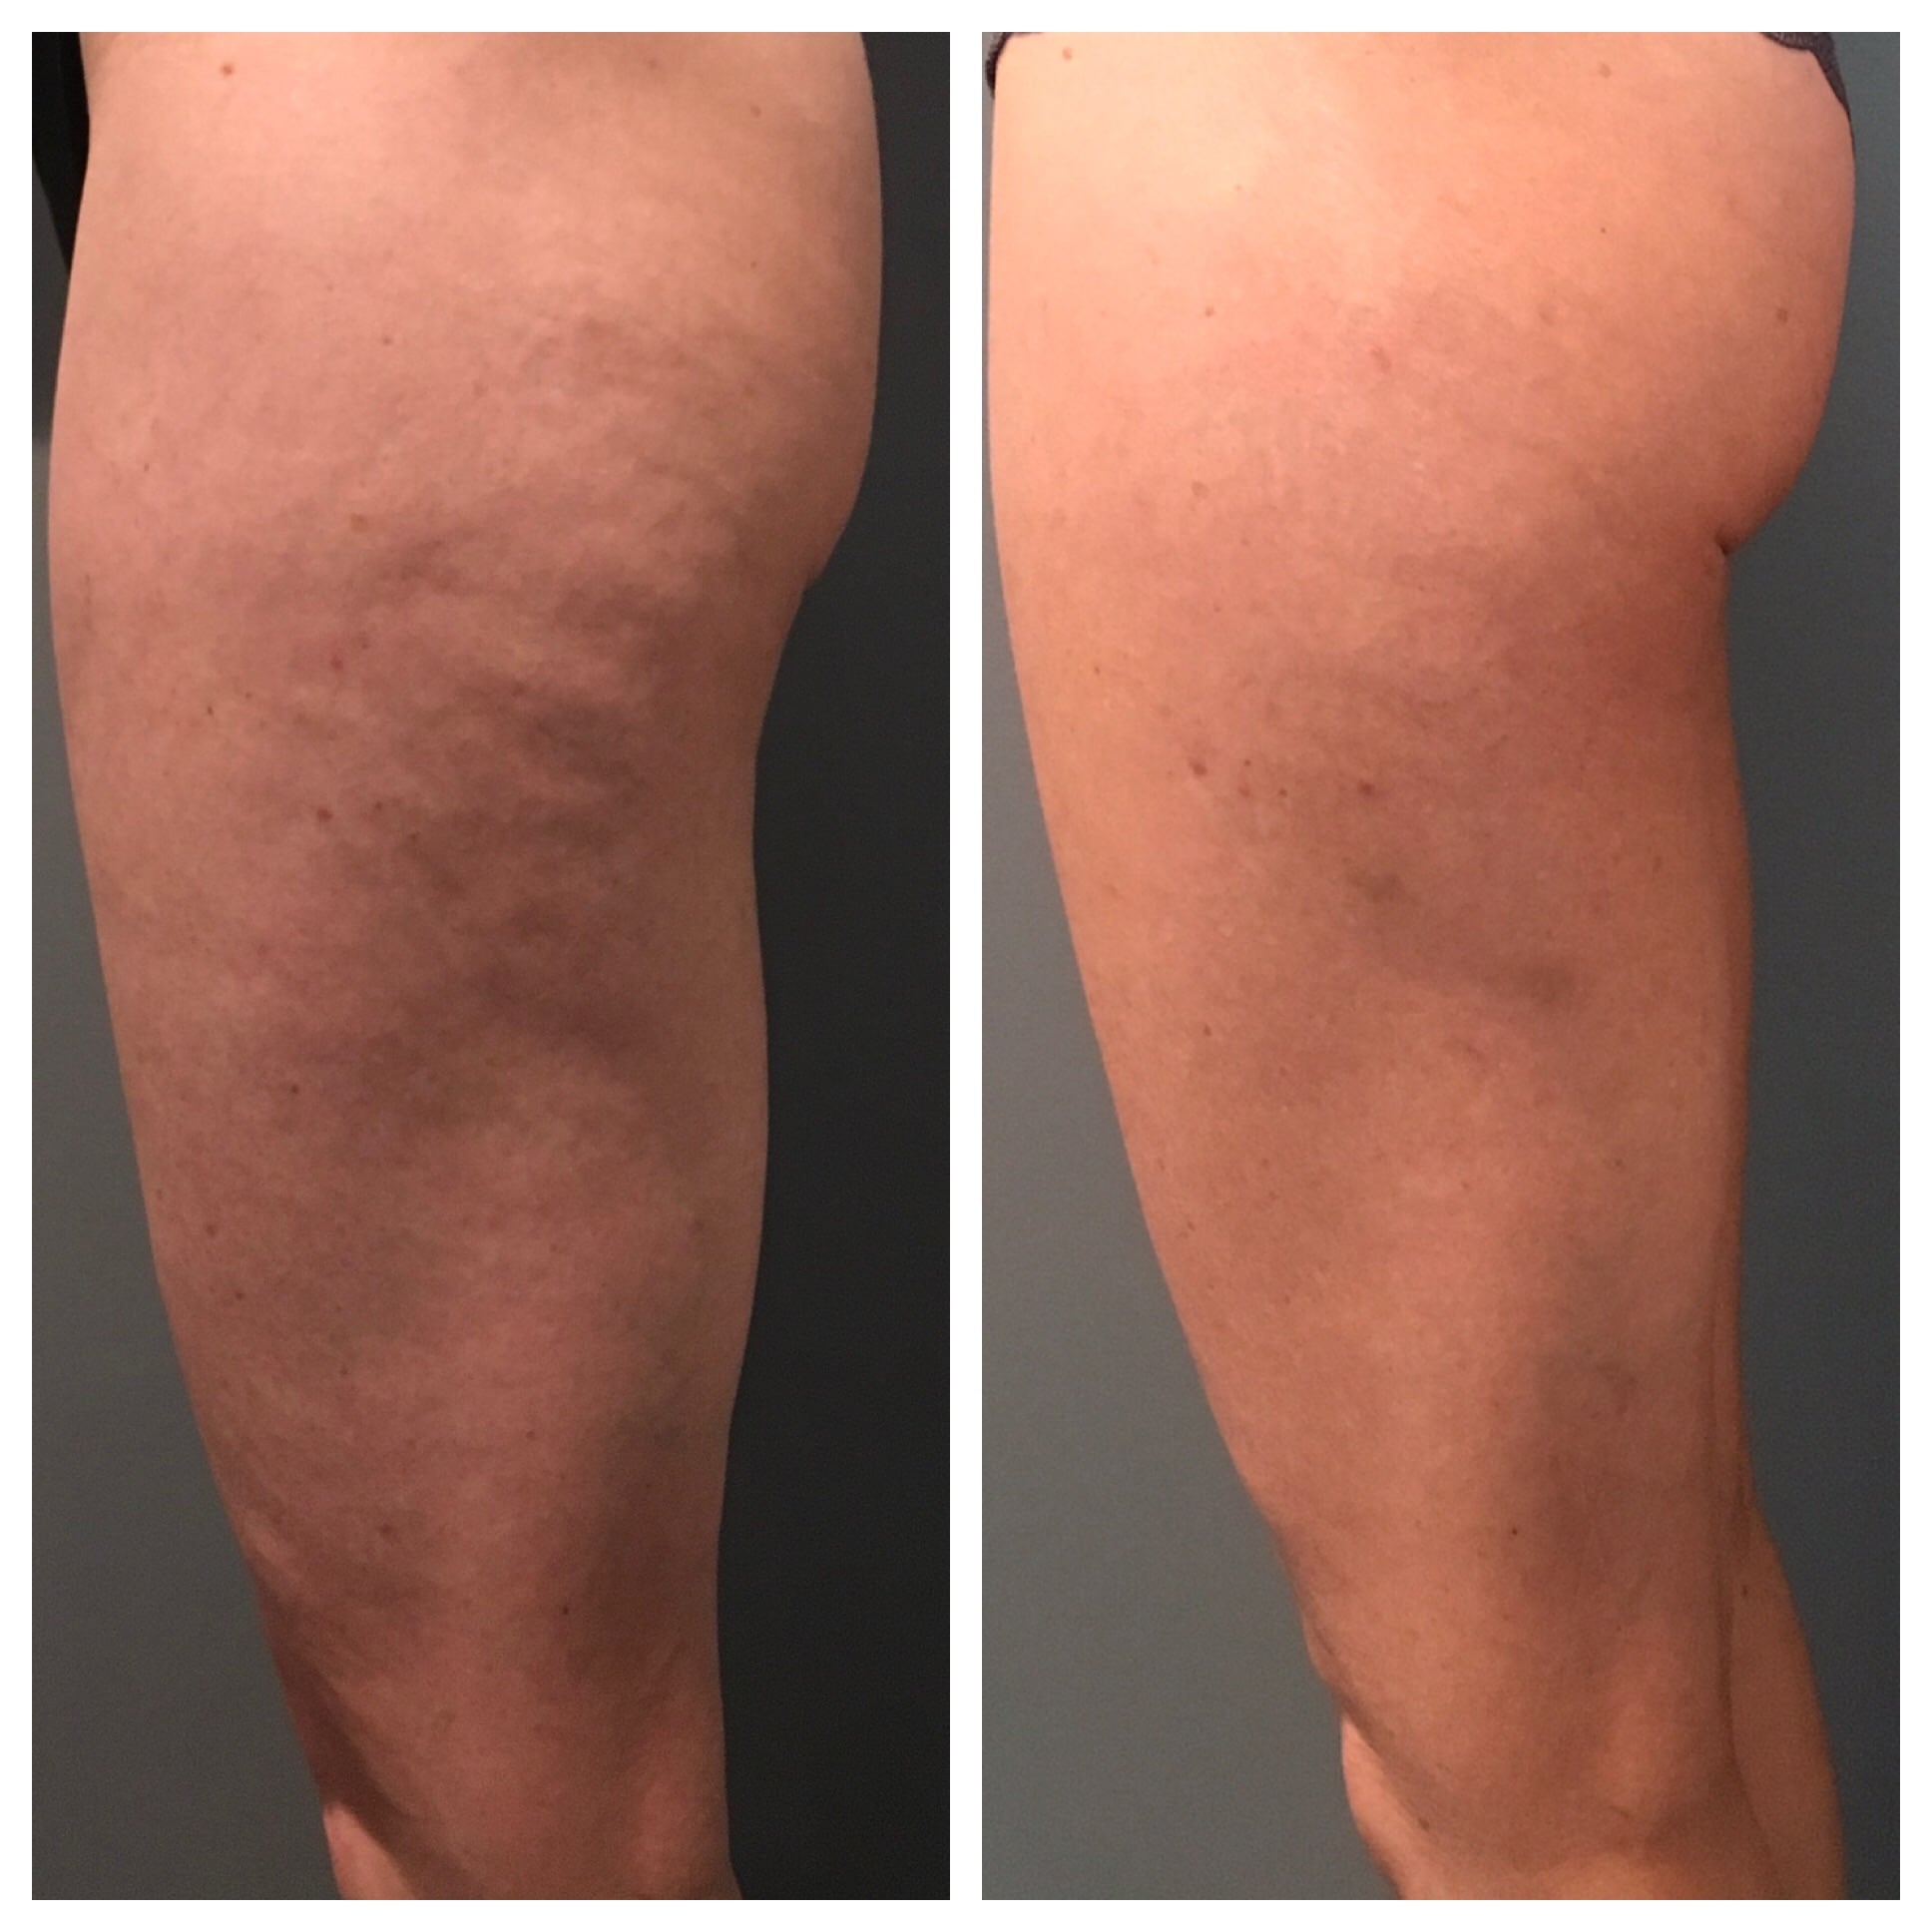 https://surfacemedicalesthetics.com/wp-content/uploads/2019/01/How-do-I-tighten-my-loose-skin-delle-chiaie.jpg